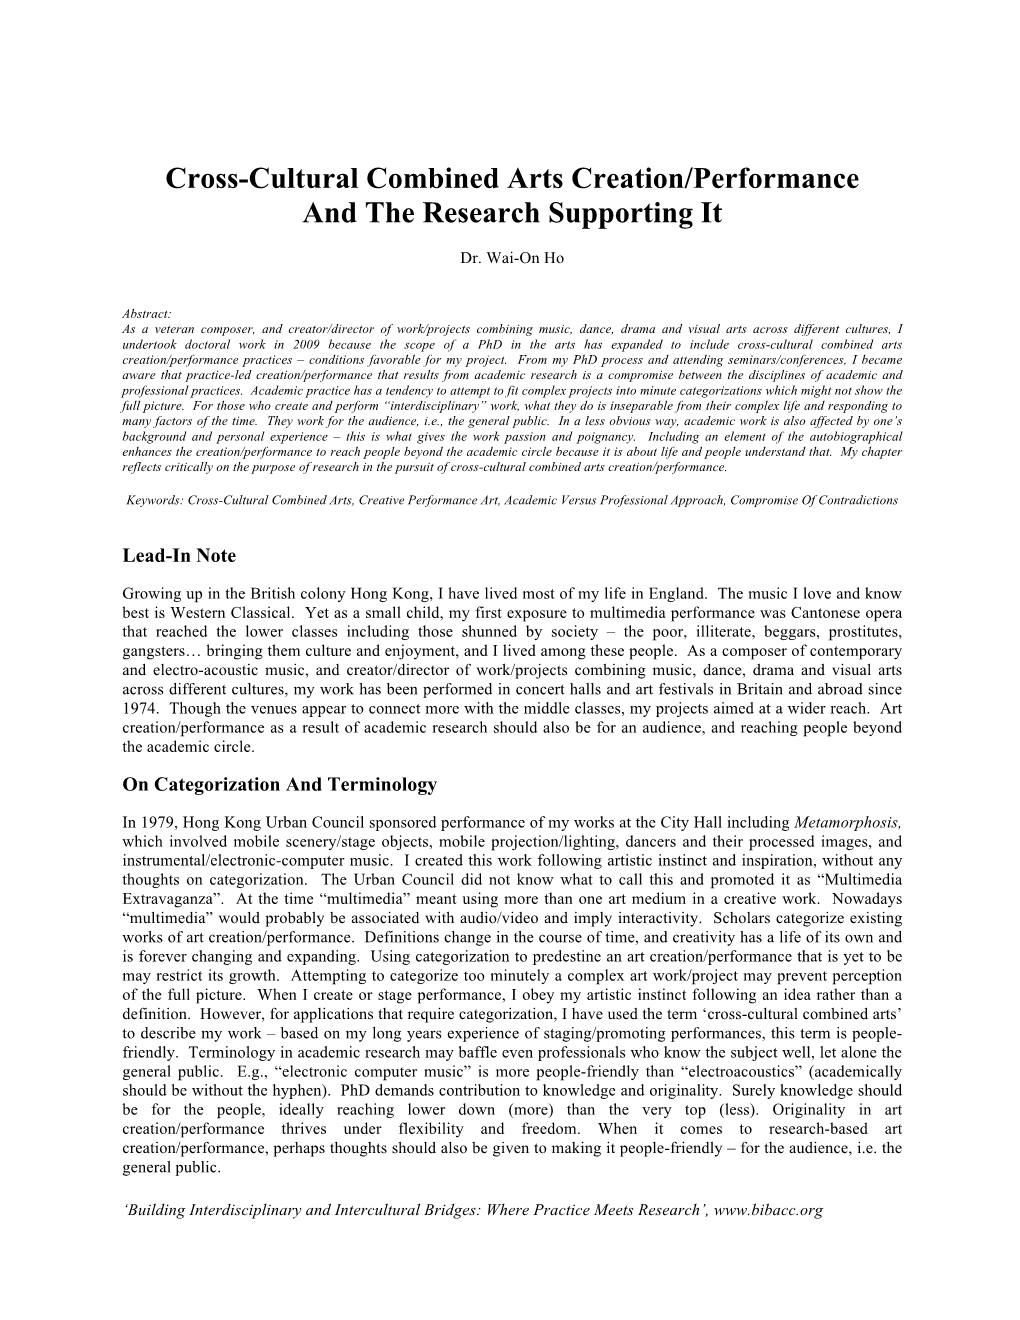 Cross-Cultural Combined Arts Creation/Performance and the Research Supporting It